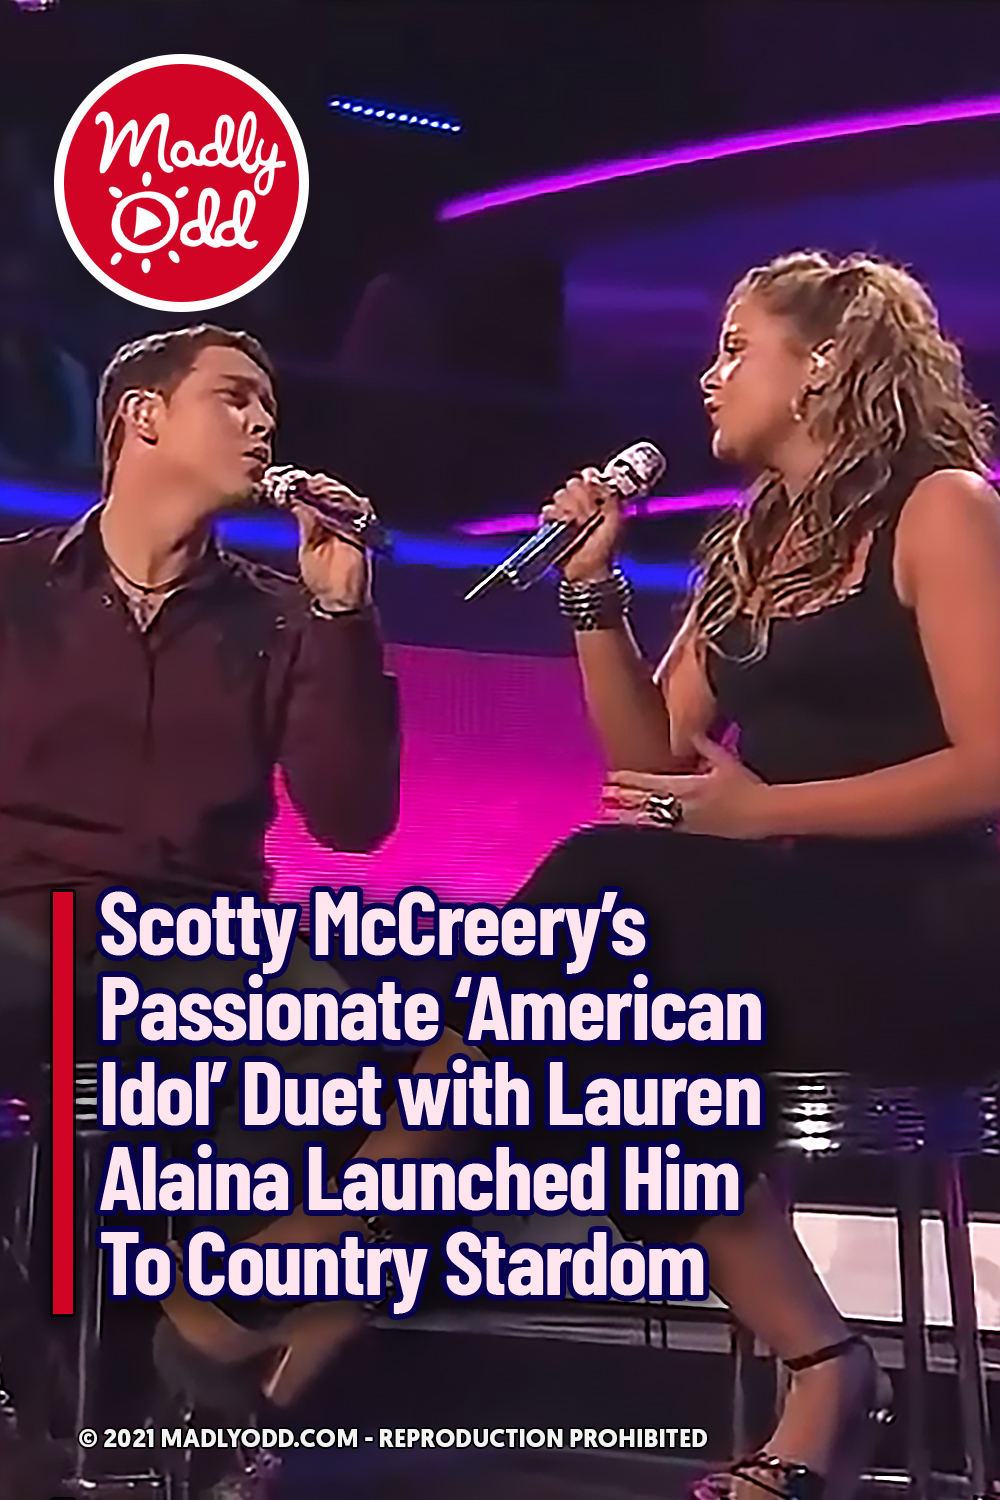 Scotty McCreery\'s Passionate \'American Idol\' Duet with Lauren Alaina Launched Him To Country Stardom